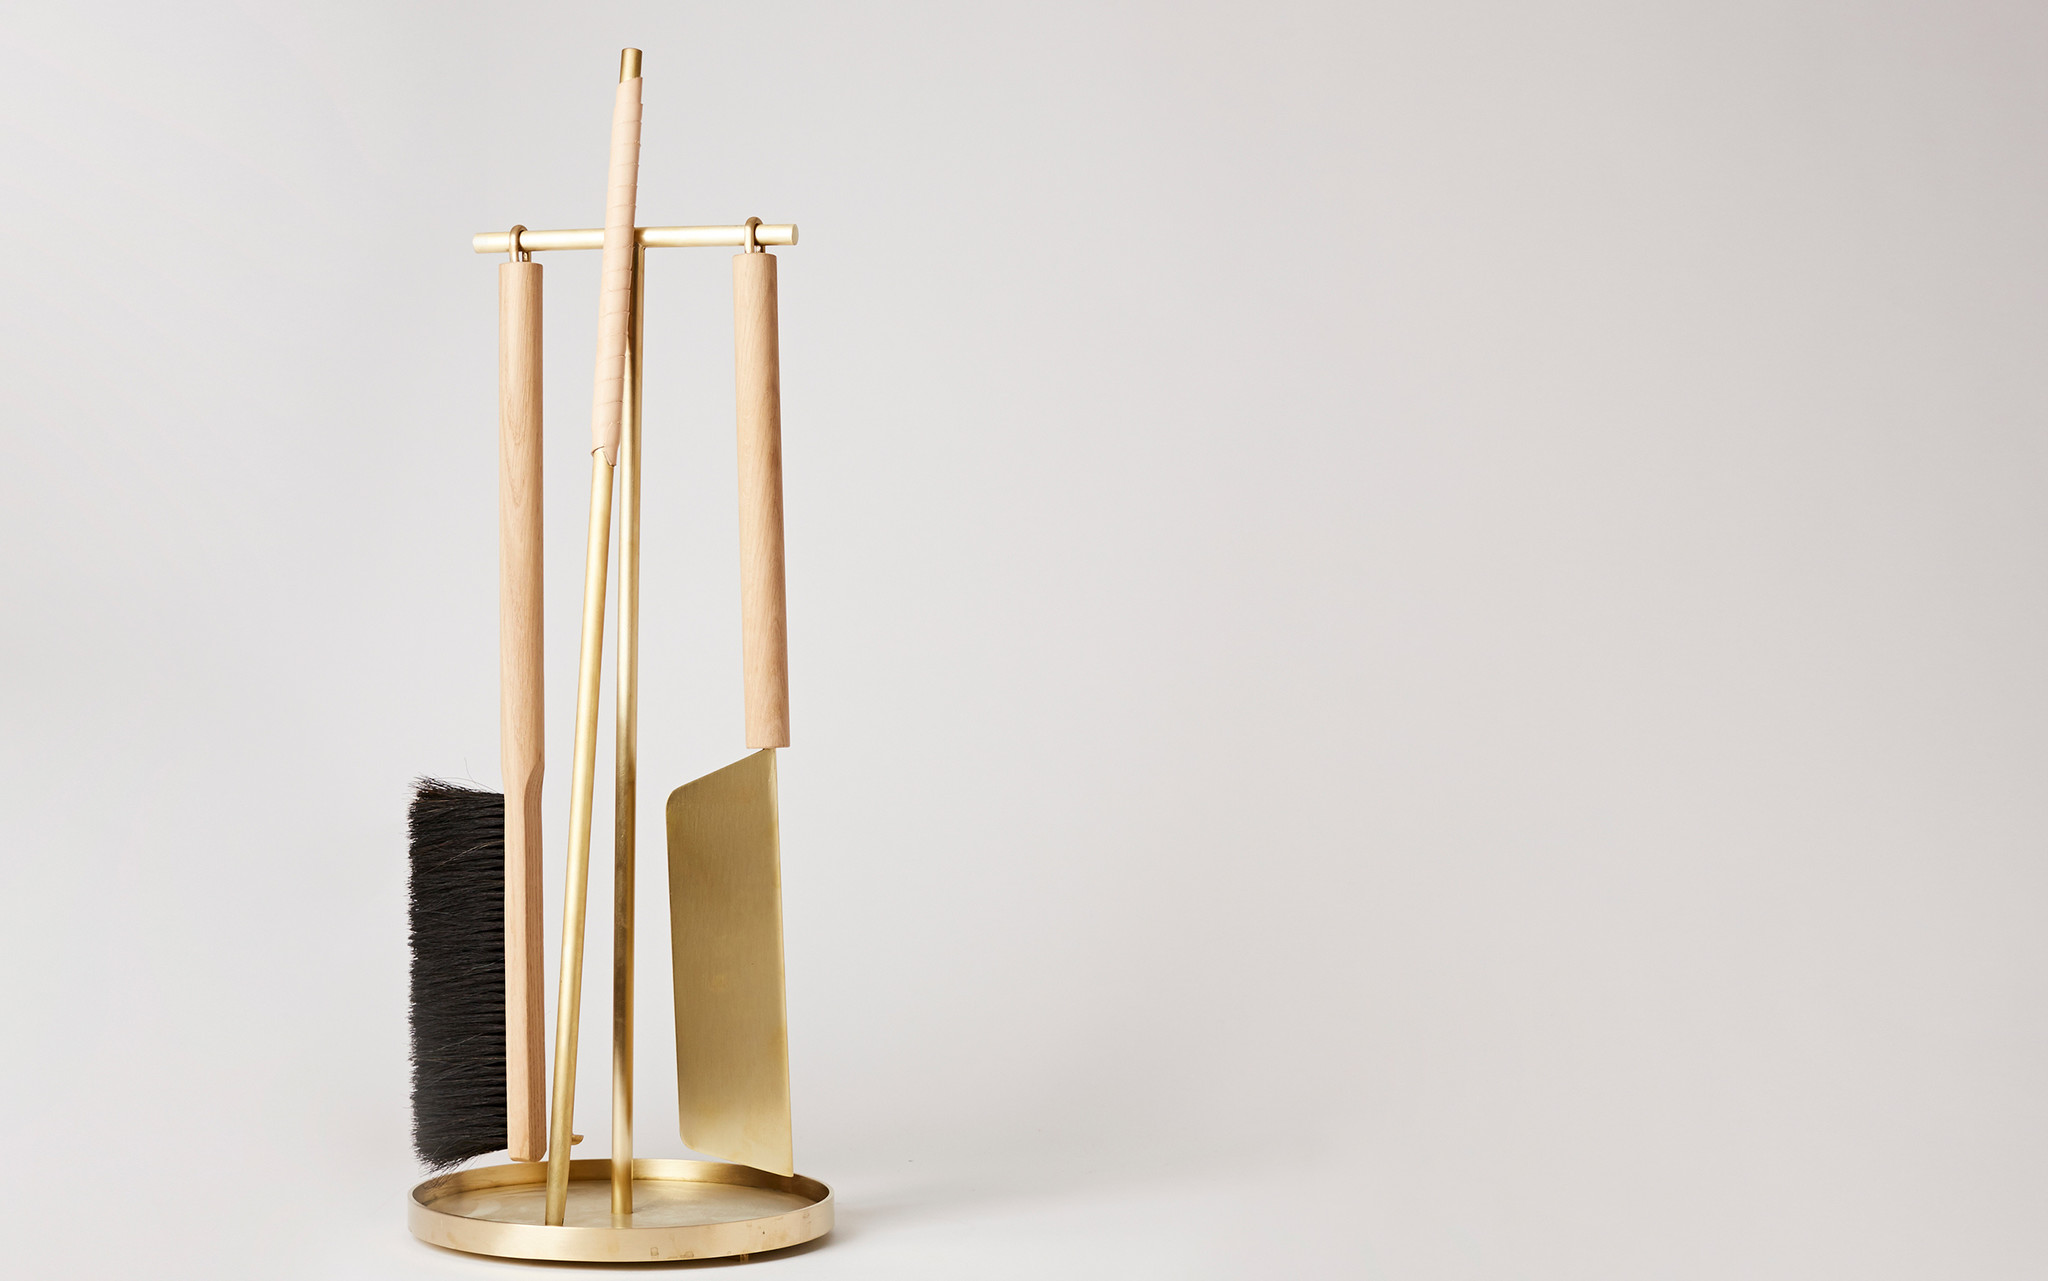 Fire Tools by Thom Fougere for Mjolk brass, oak and natural